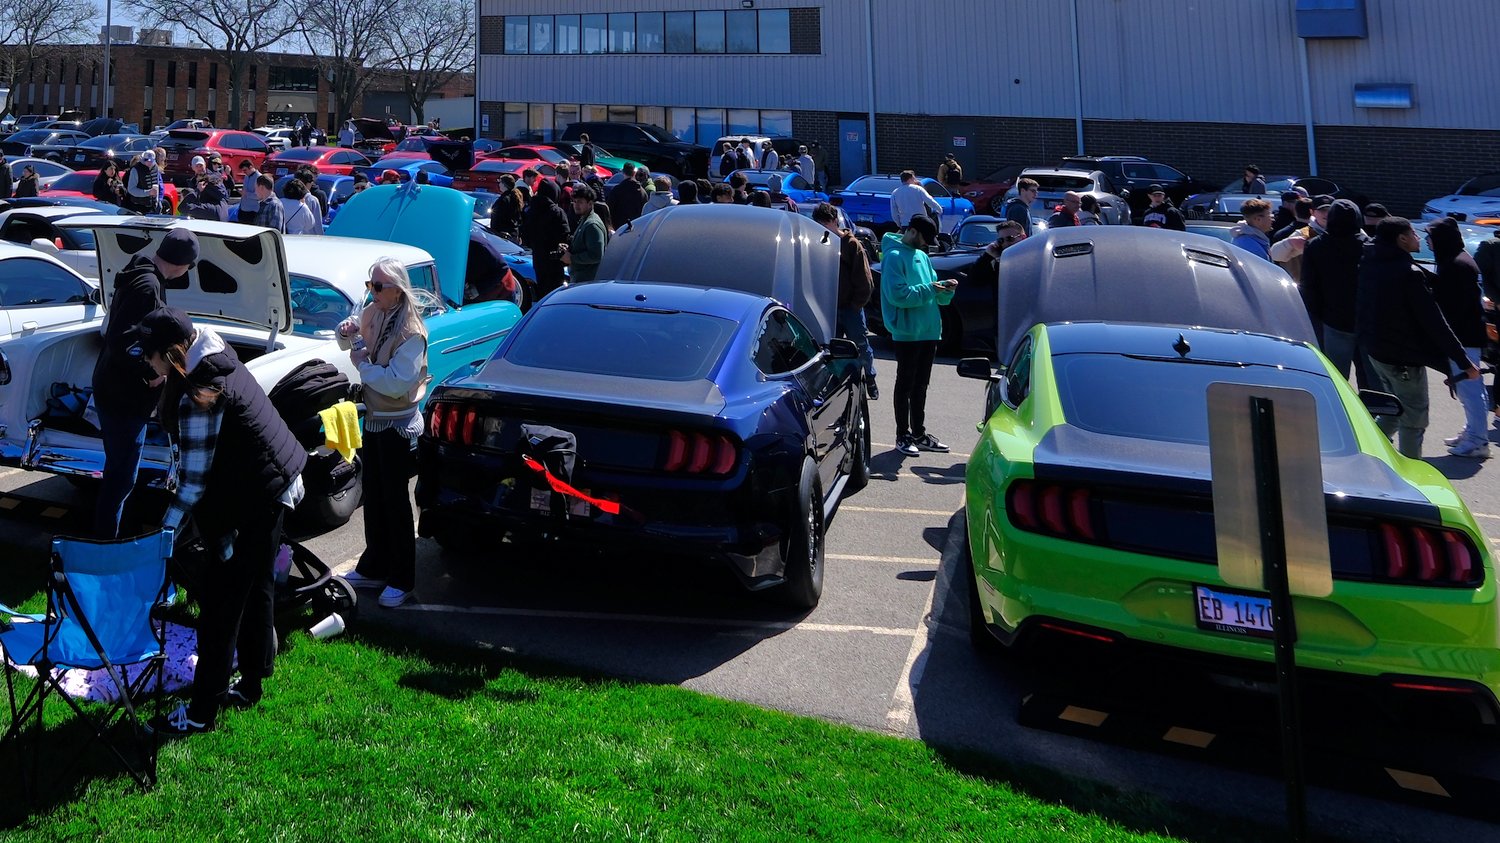 Cars and people at the Cars and Coffee car show at Illinois Motors.